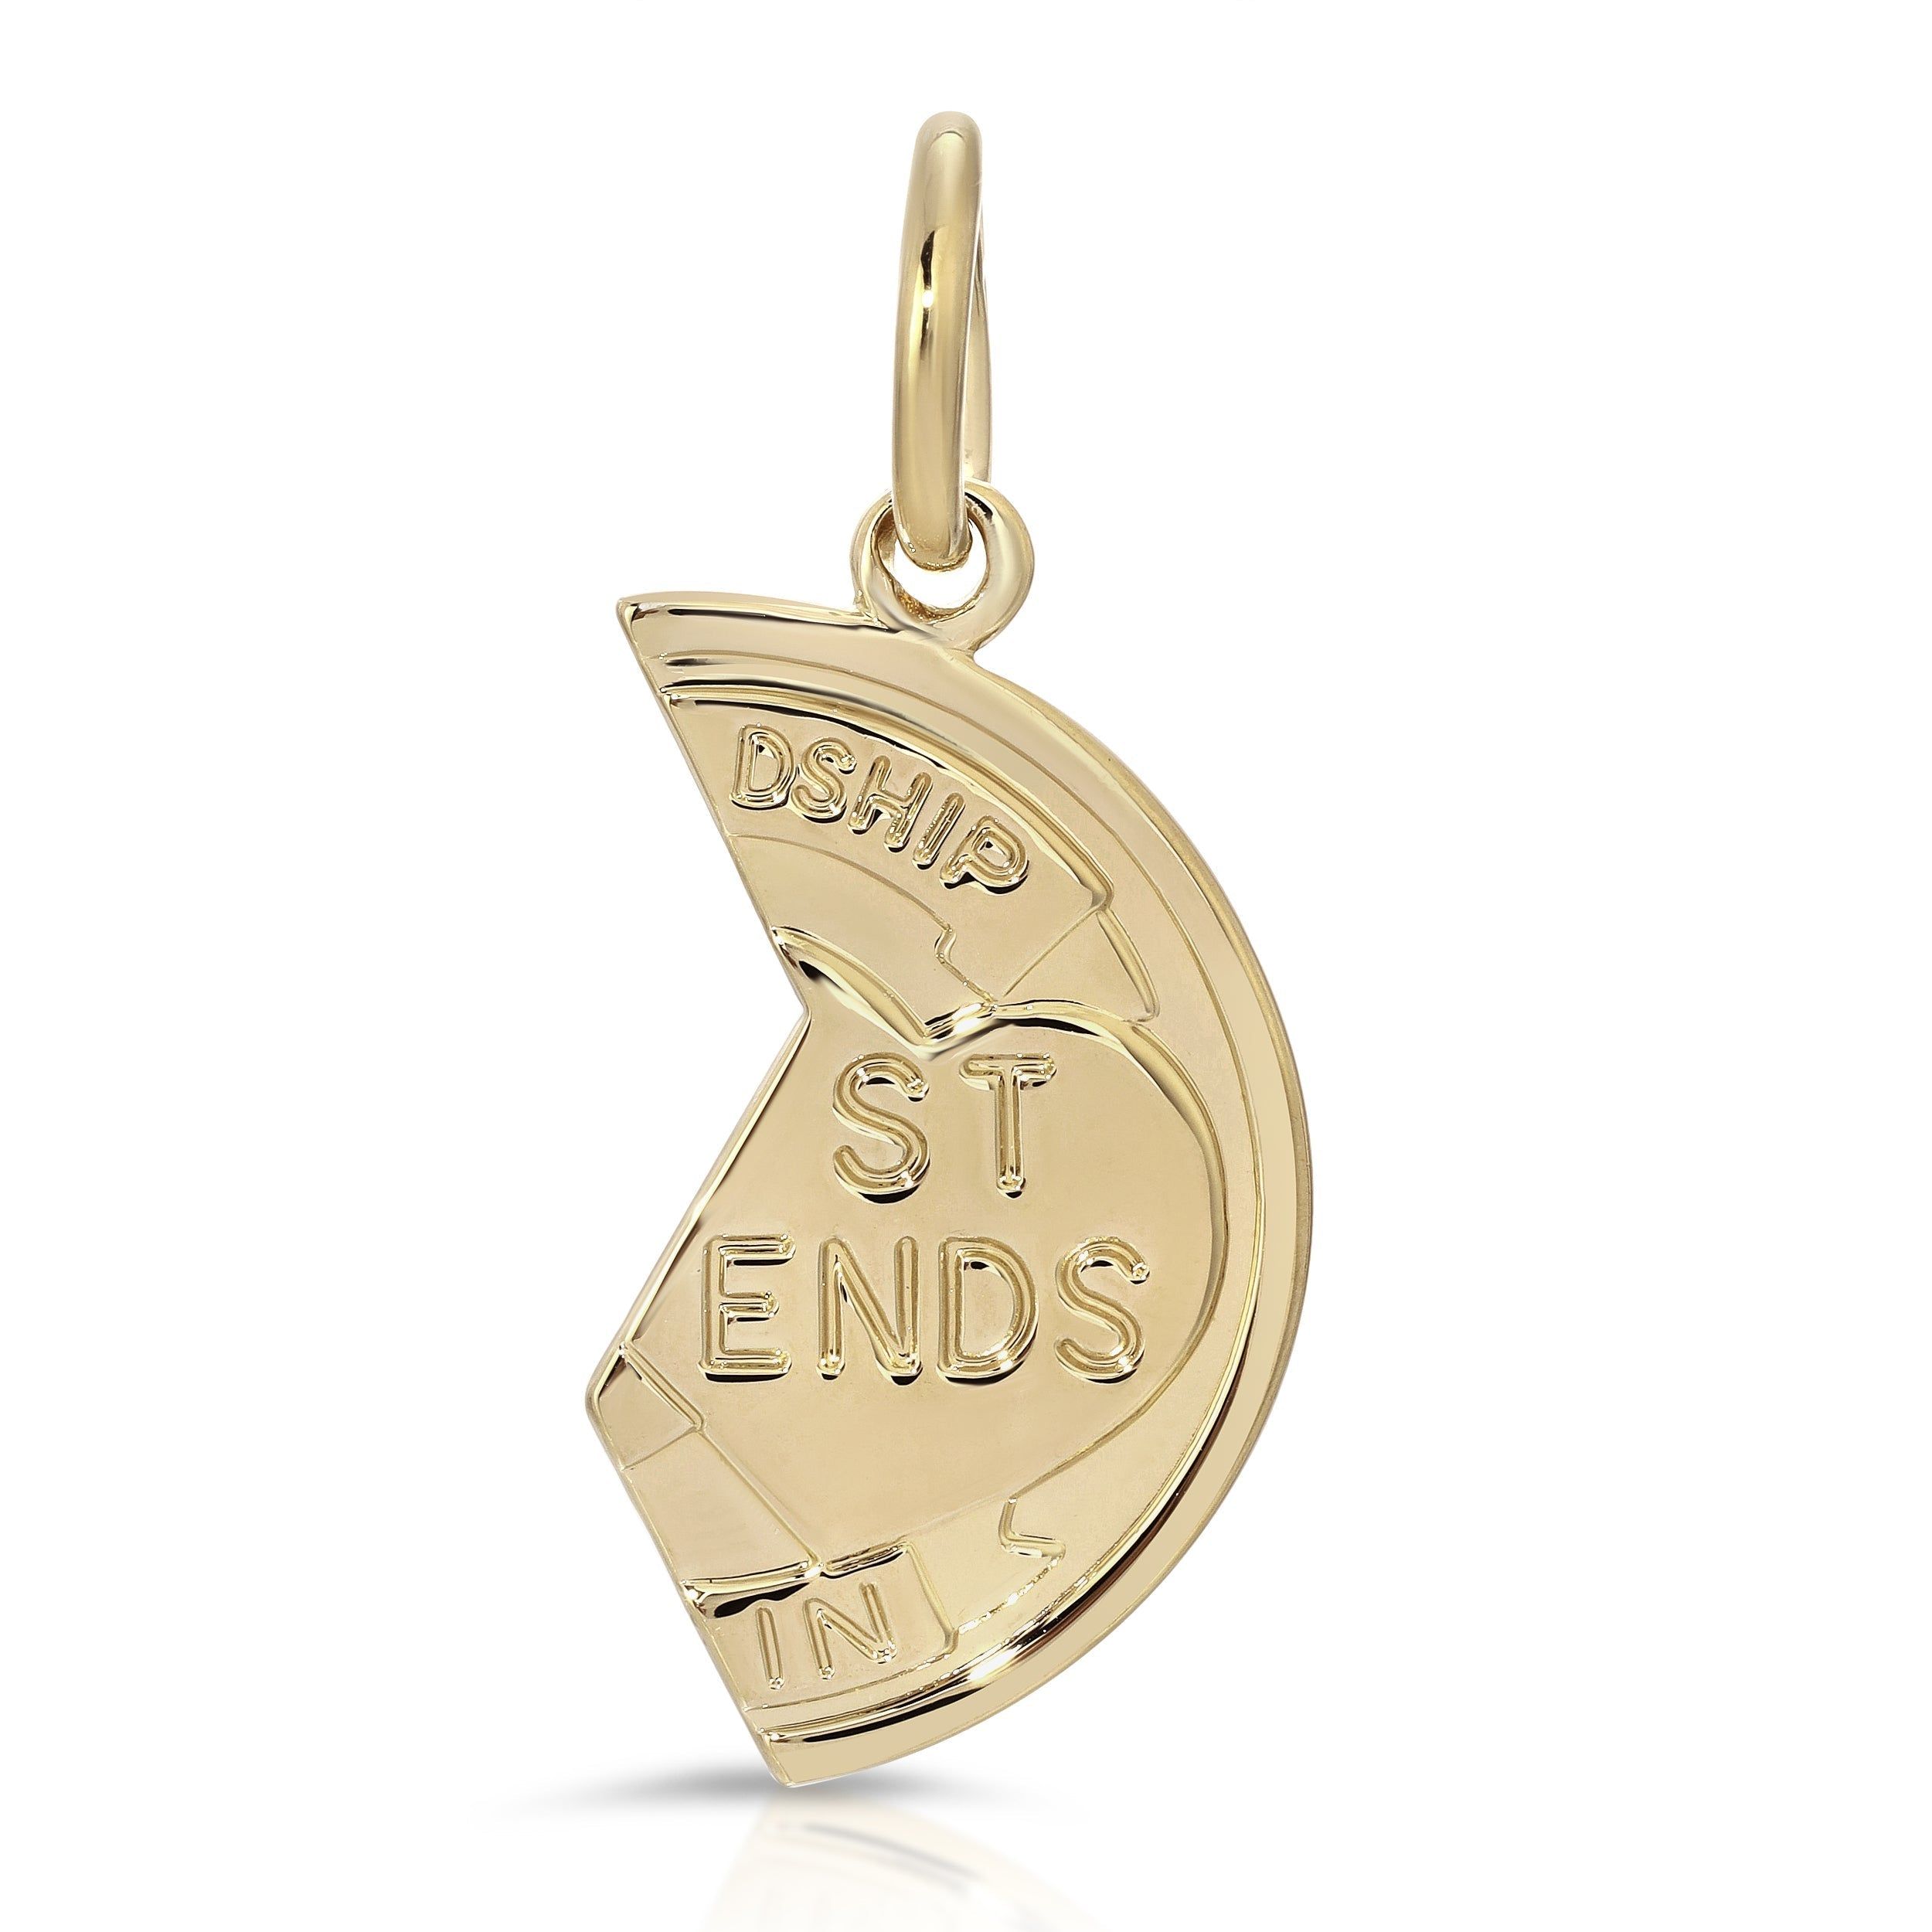 a gold pendant with the words, best ends in it